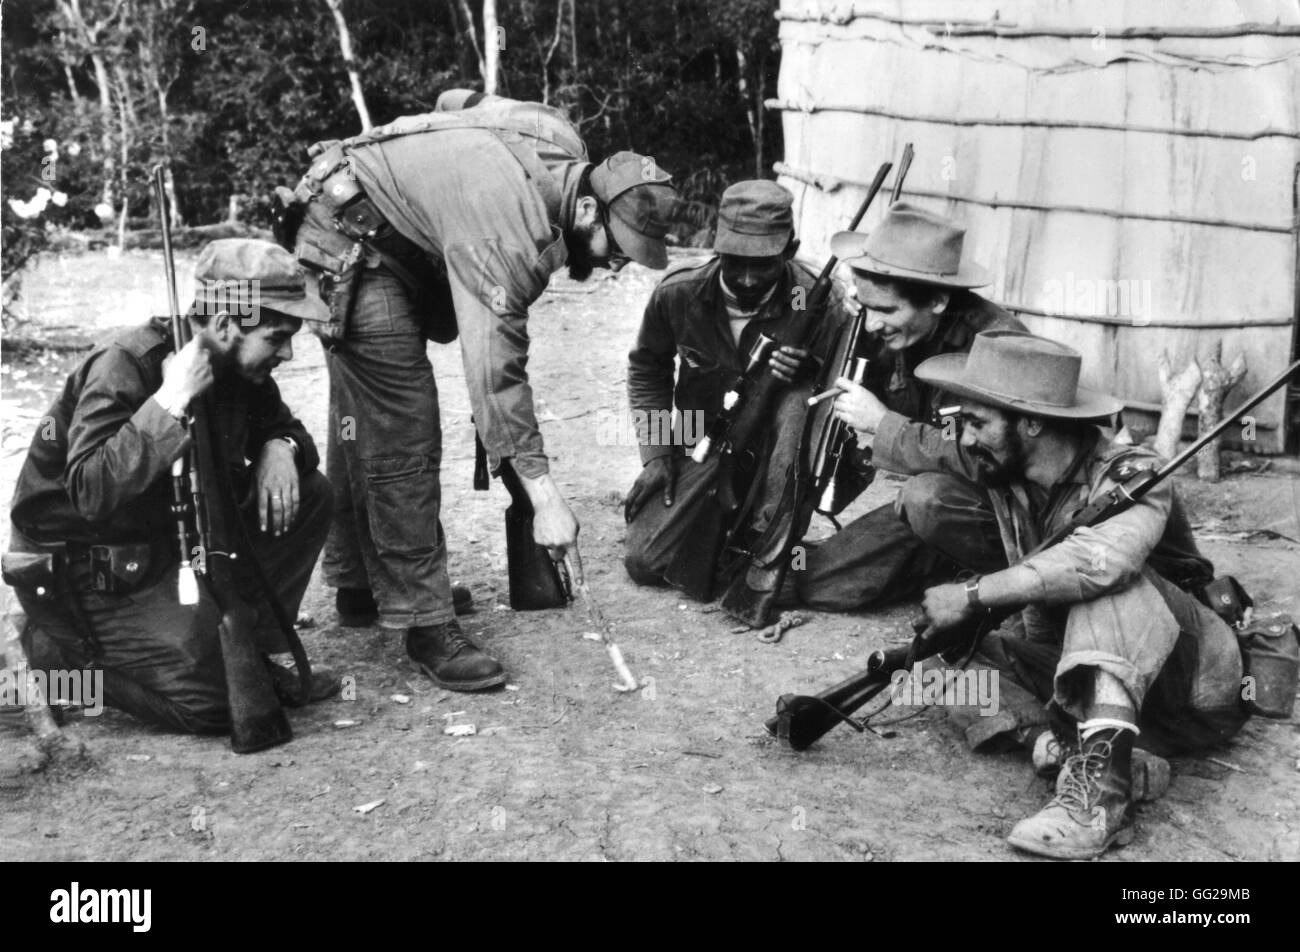 During the revolution, Fidel Castro and Che Guevara surrounded by guerillas 1956-1959 Cuba Stock Photo